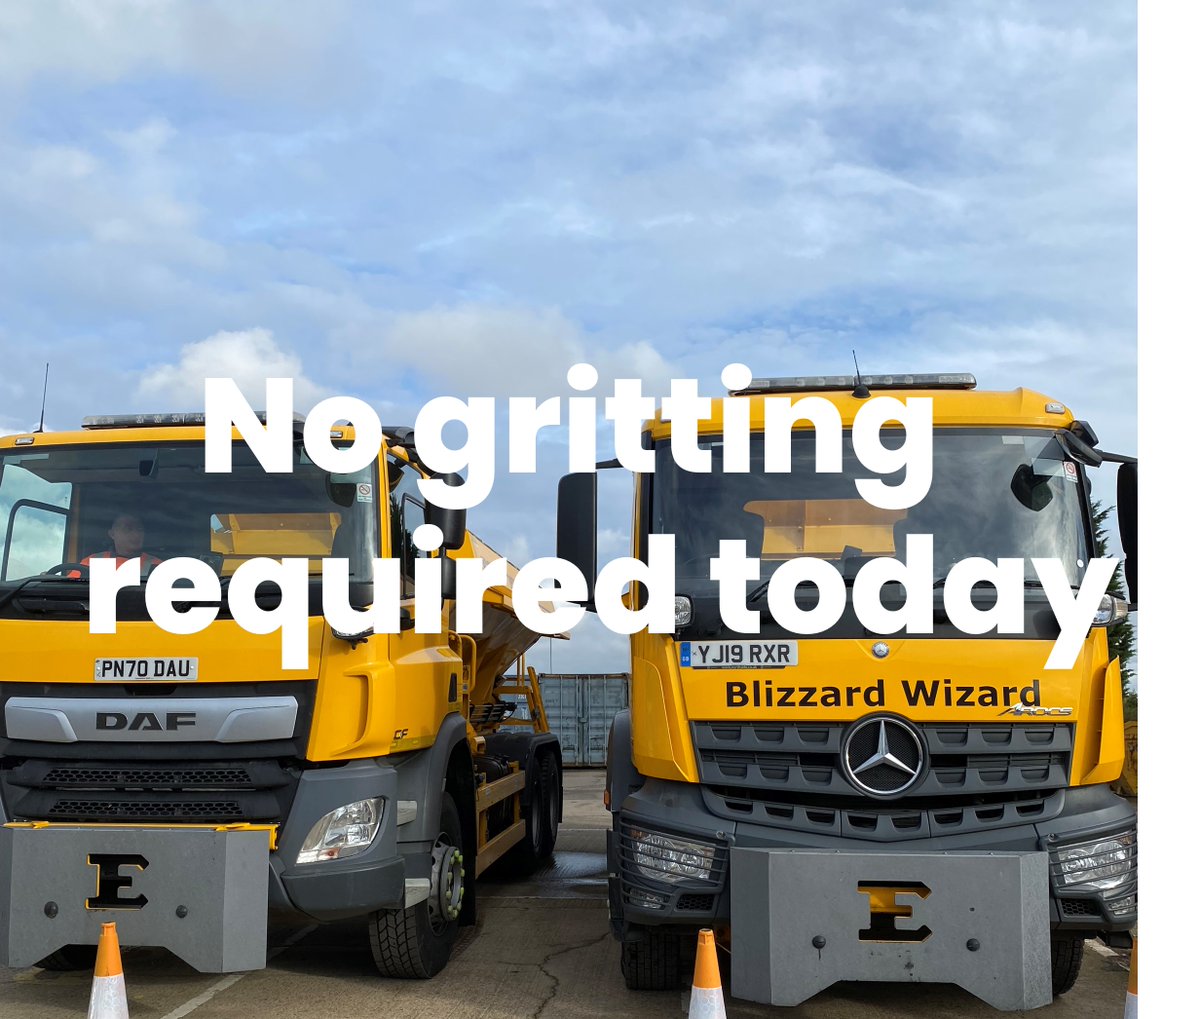 ❄️ Winter Service Decision 25-03-24 ❄️ No gritting action required today. For more winter updates please visit: ow.ly/xBeU50R1jPb